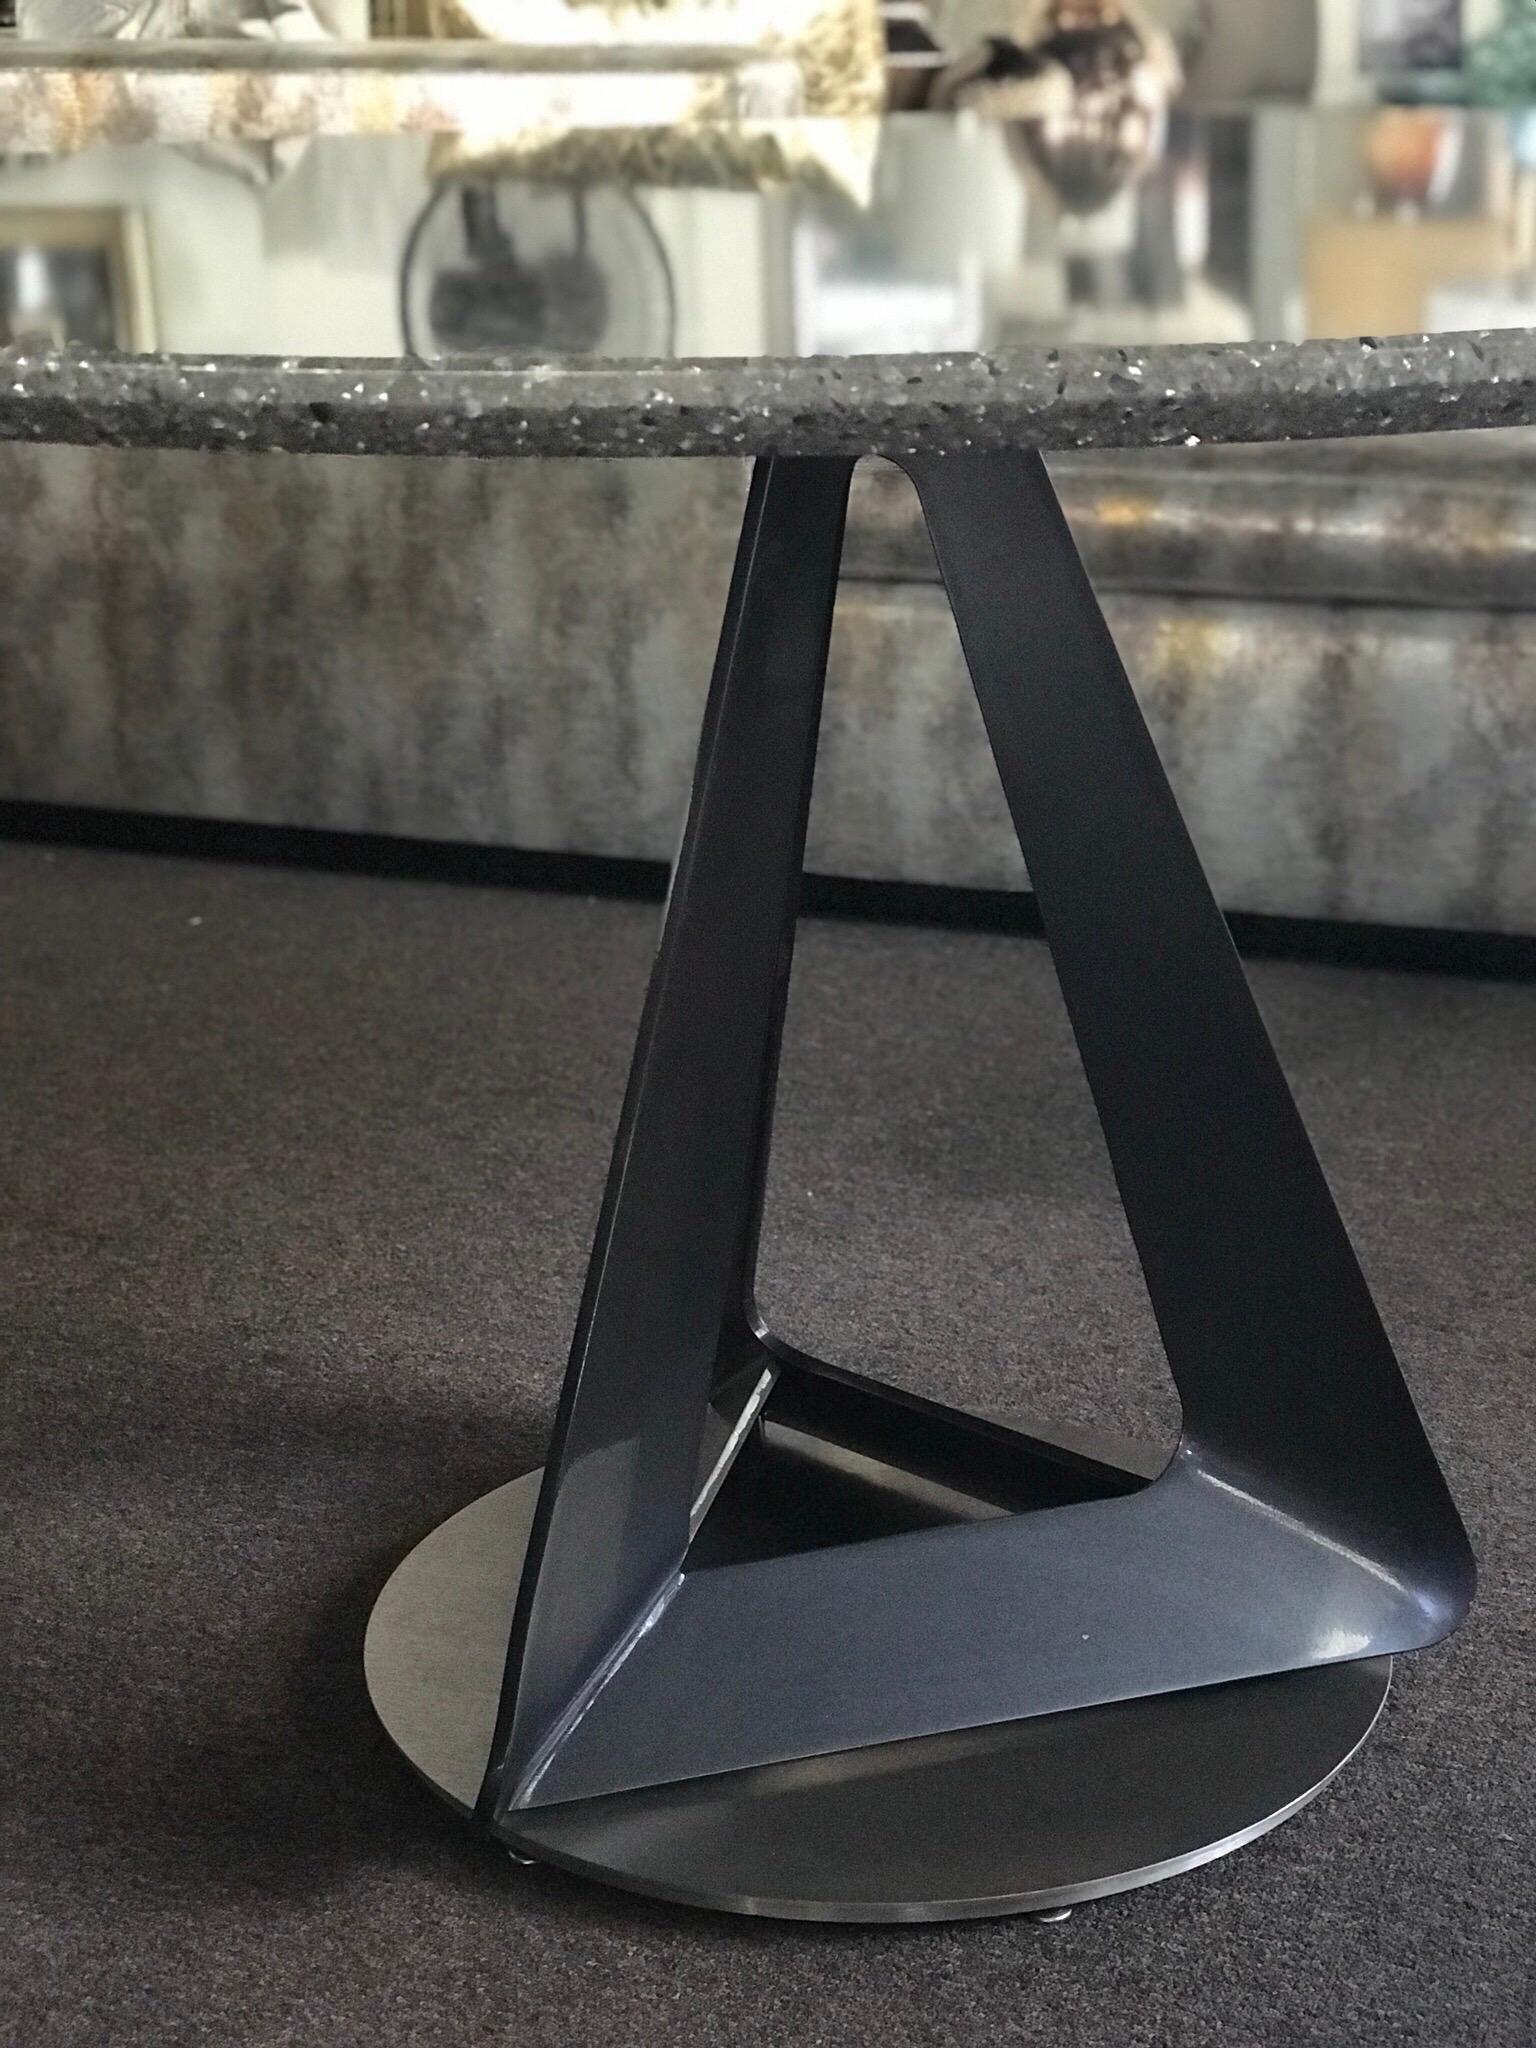 This Beauty came from one of the most expensive, upscale country clubs in the Palm Springs area. I don't know much about it, other than it is a modern sculpture in the form of a dining or game table. It was custom made for the residence. I am pretty